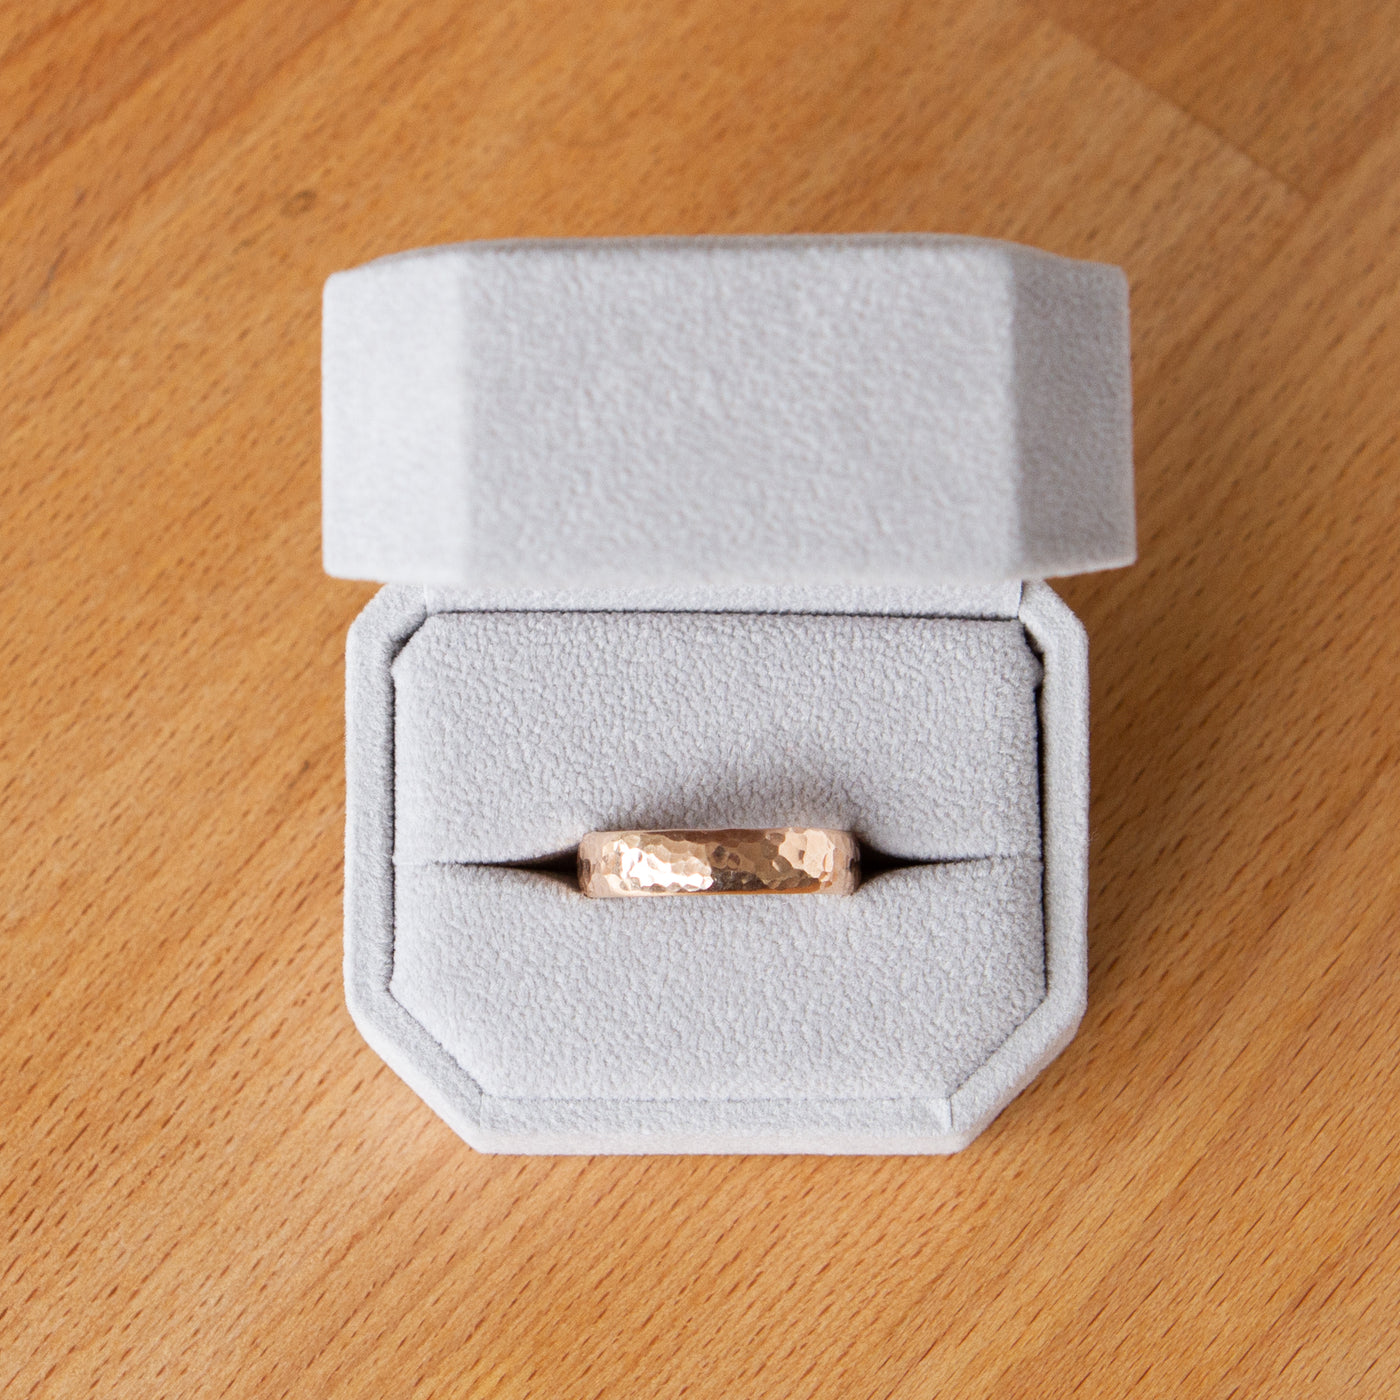 Blue Ridge half round wide rose gold wedding band in a ring box